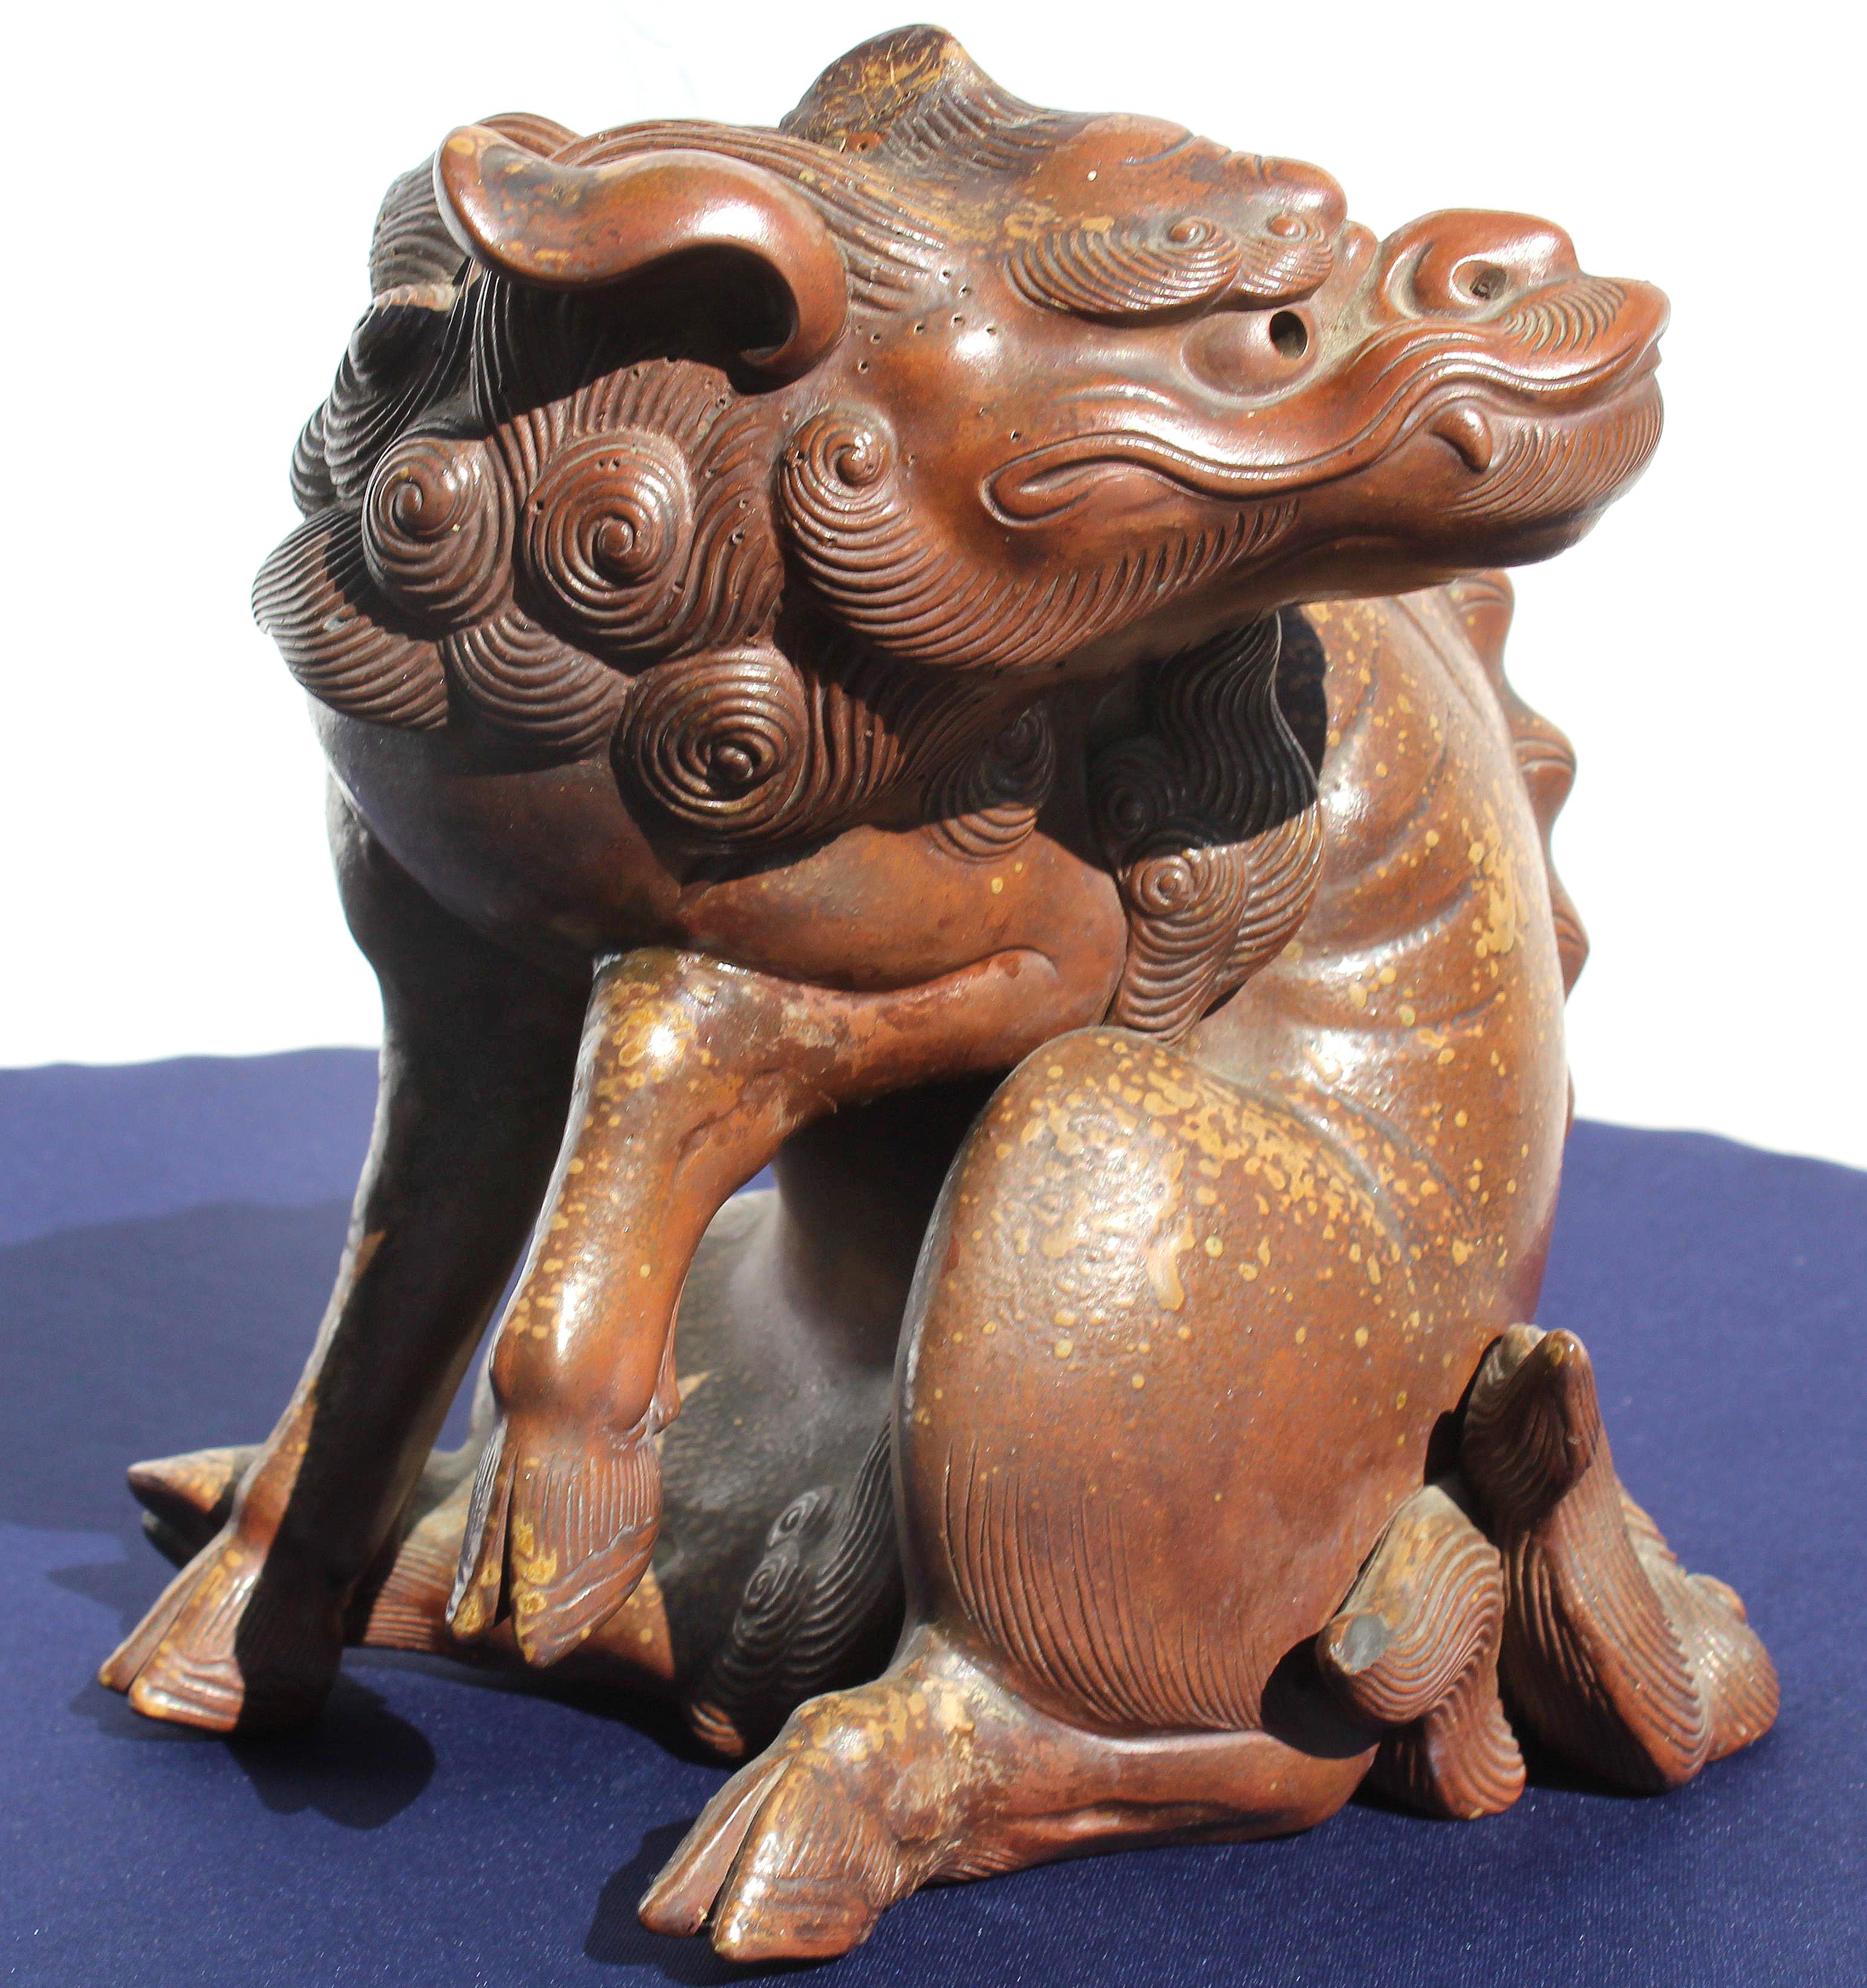 19th Century Japanese Earthenware Foo Dog Lion Dragon

Offered for sale is a dramatic and strong late 19th century Japanese foo lion. The earthenware figure was created in an unusual form and was acquired from a New York City dealer's private Asian